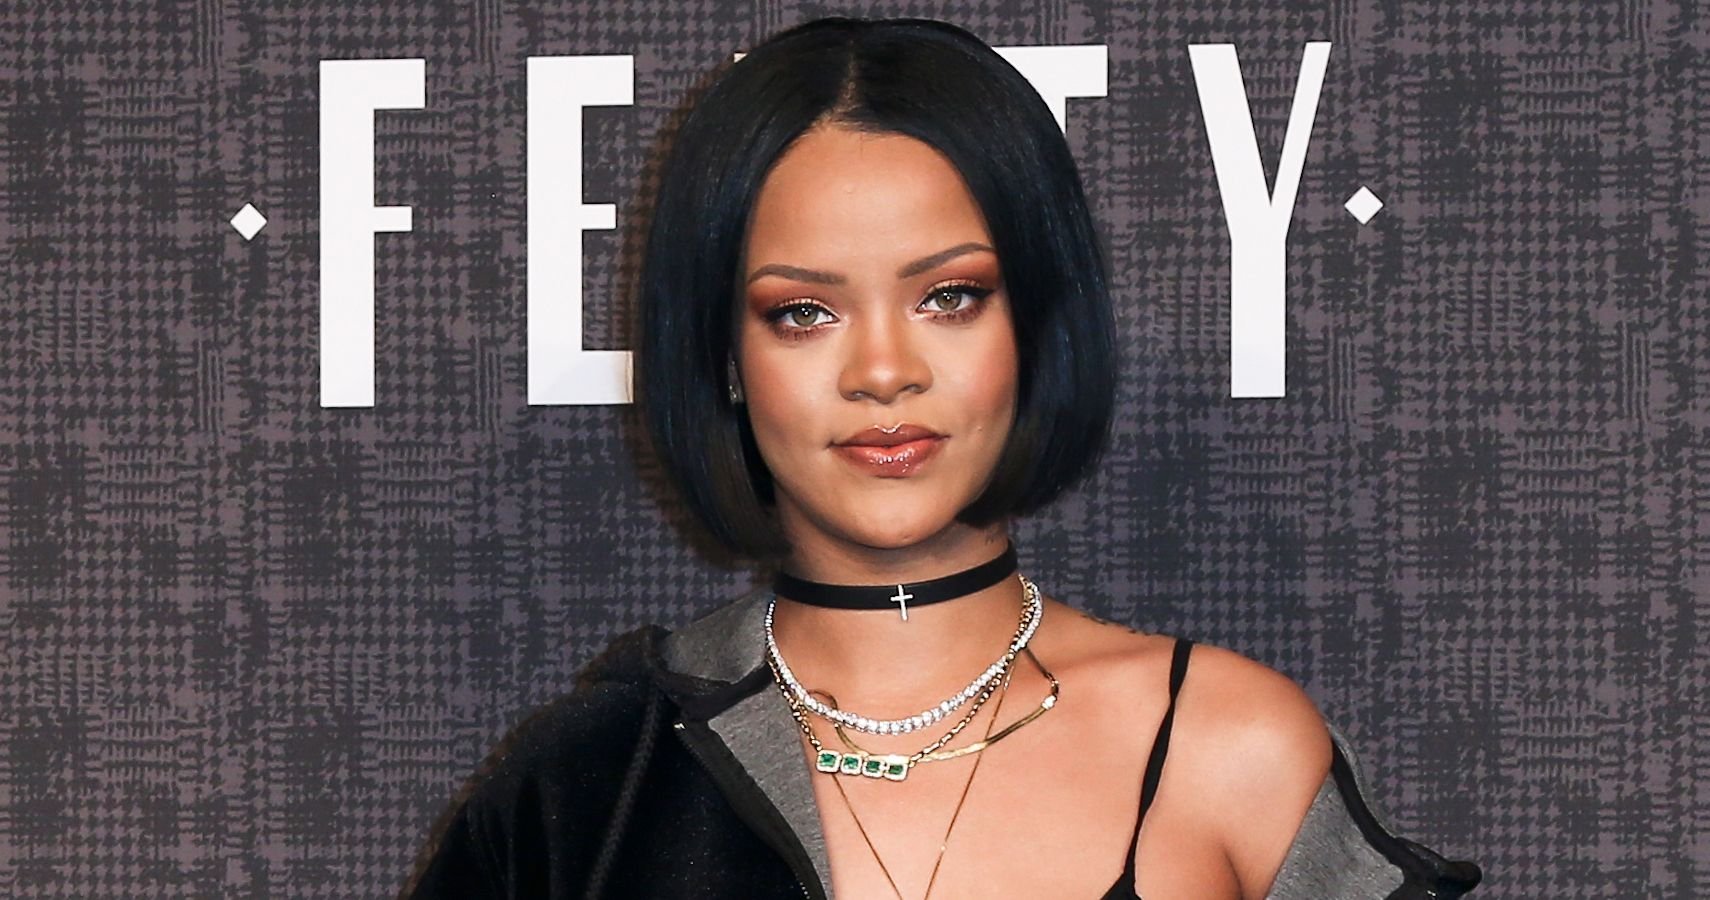 Rihanna's Fenty Sued After Fashion Show Song Caused Religious Backlash